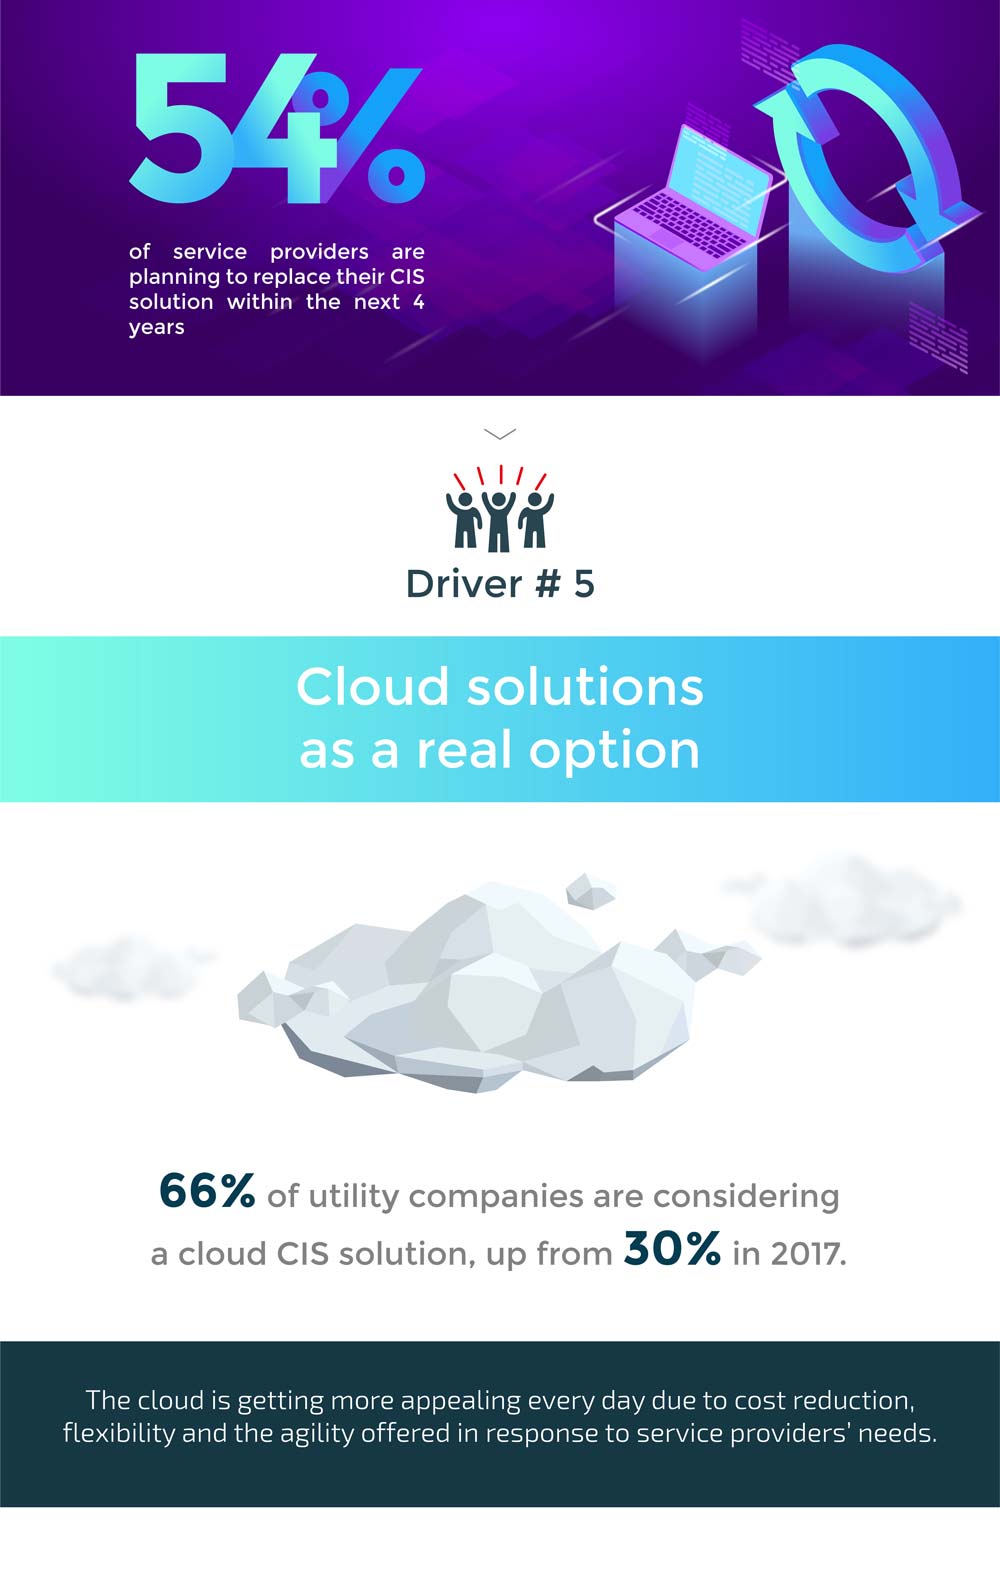 Cloud solutions as a real option